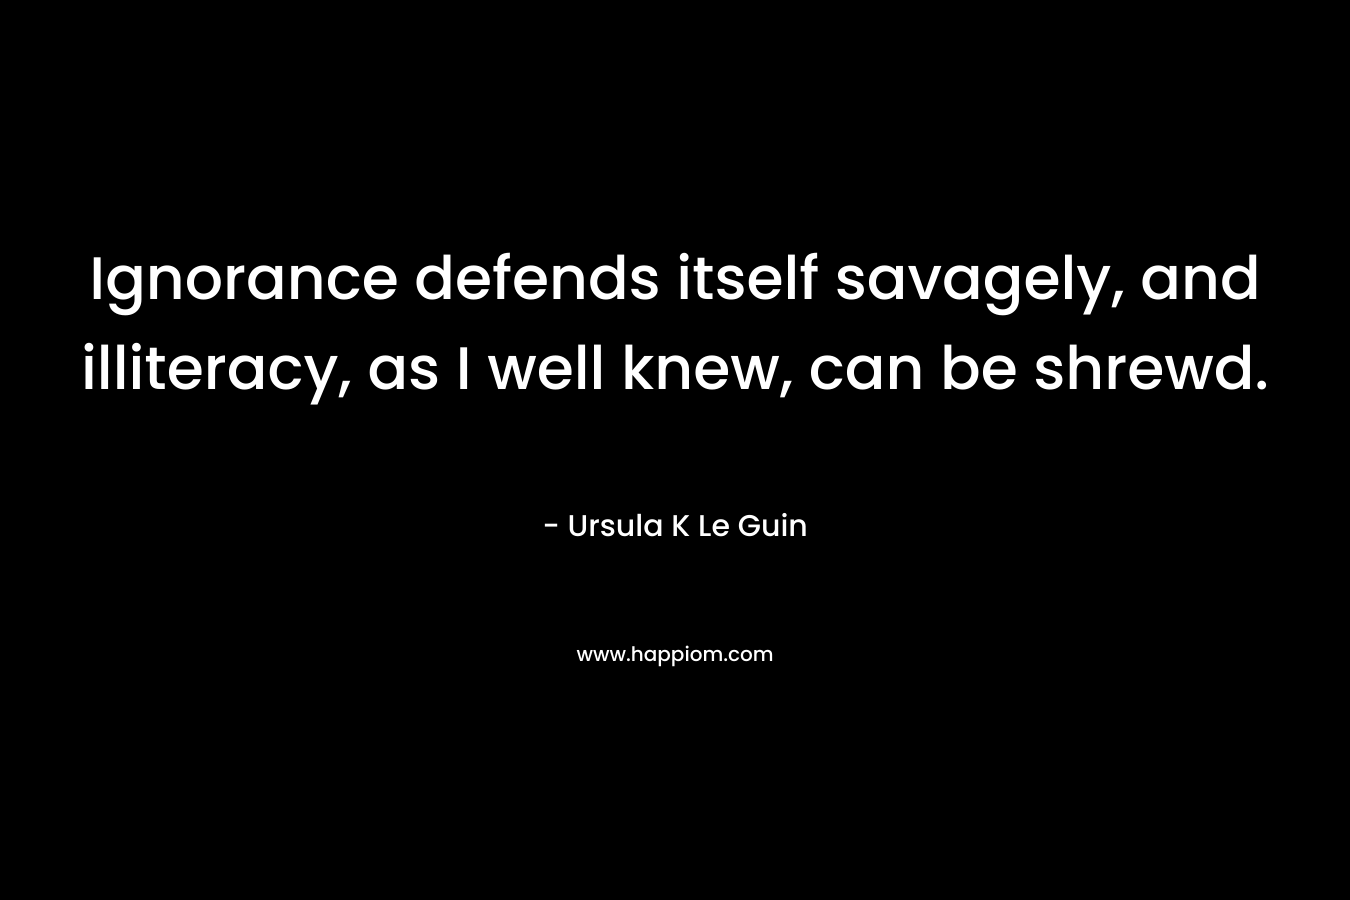 Ignorance defends itself savagely, and illiteracy, as I well knew, can be shrewd.